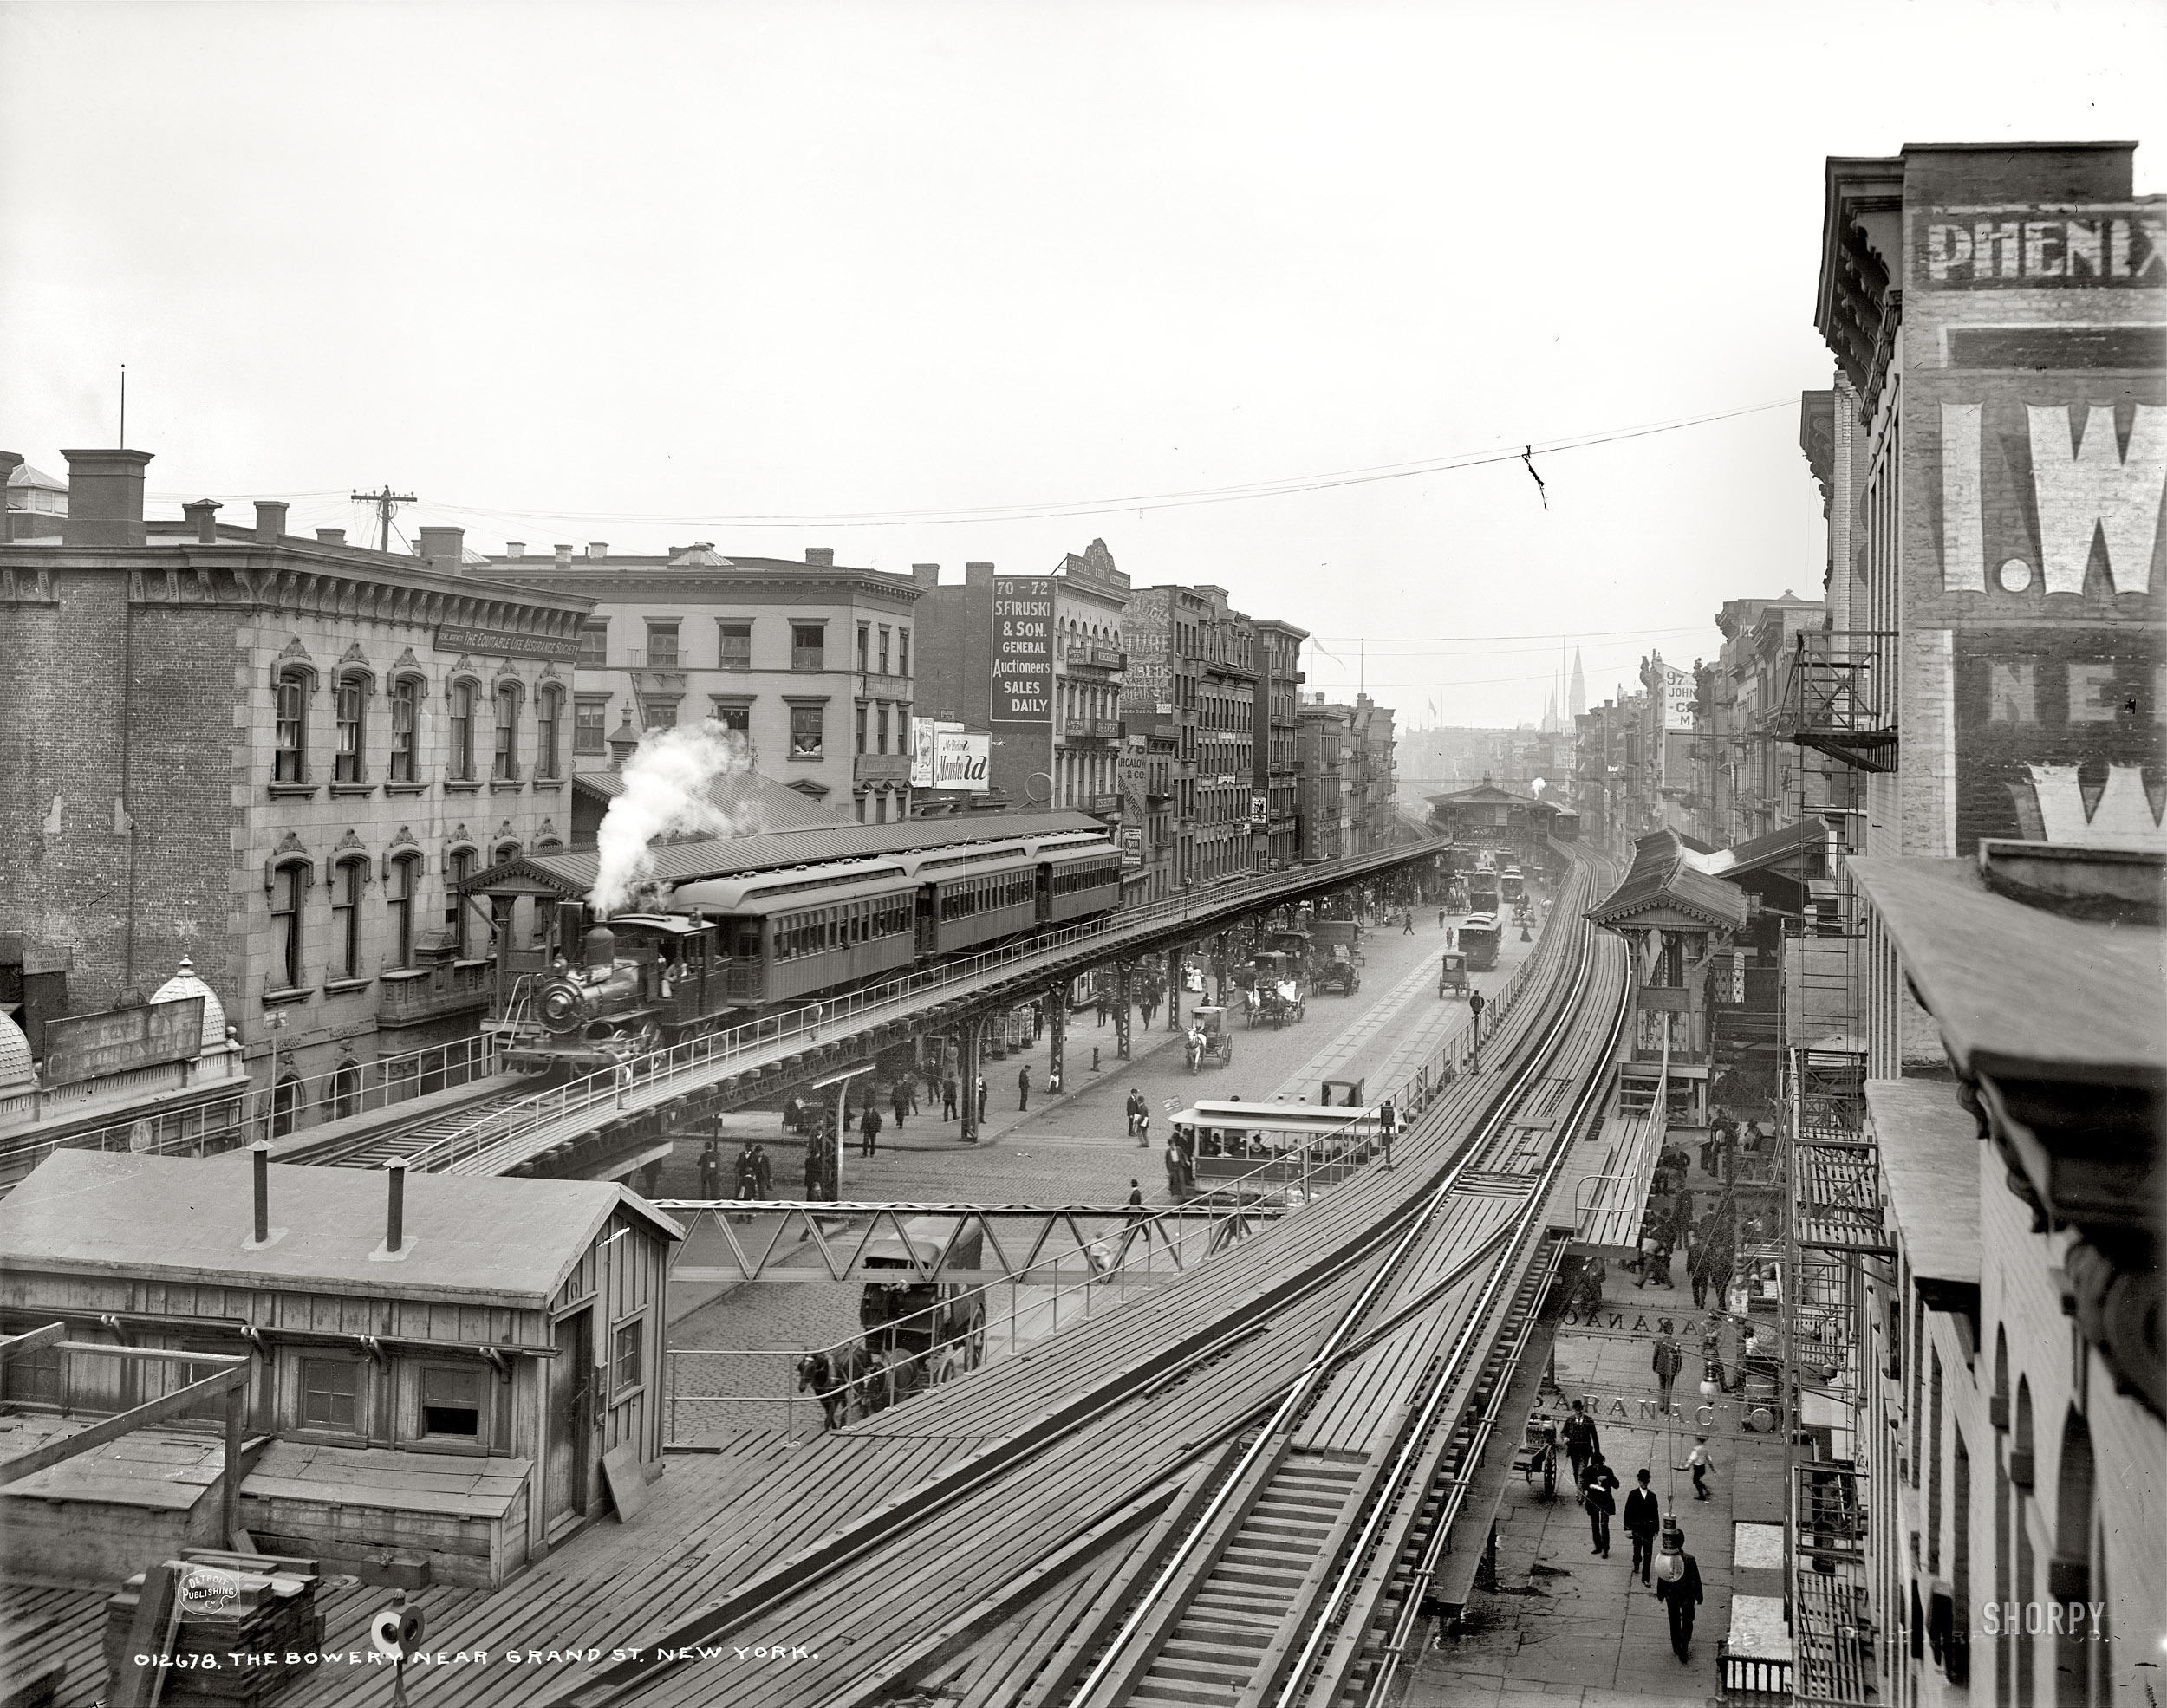 New York circa 1900. "The Bowery near Grand Street." 8x10 inch dry plate glass negative, Detroit Publishing Company. View full size.